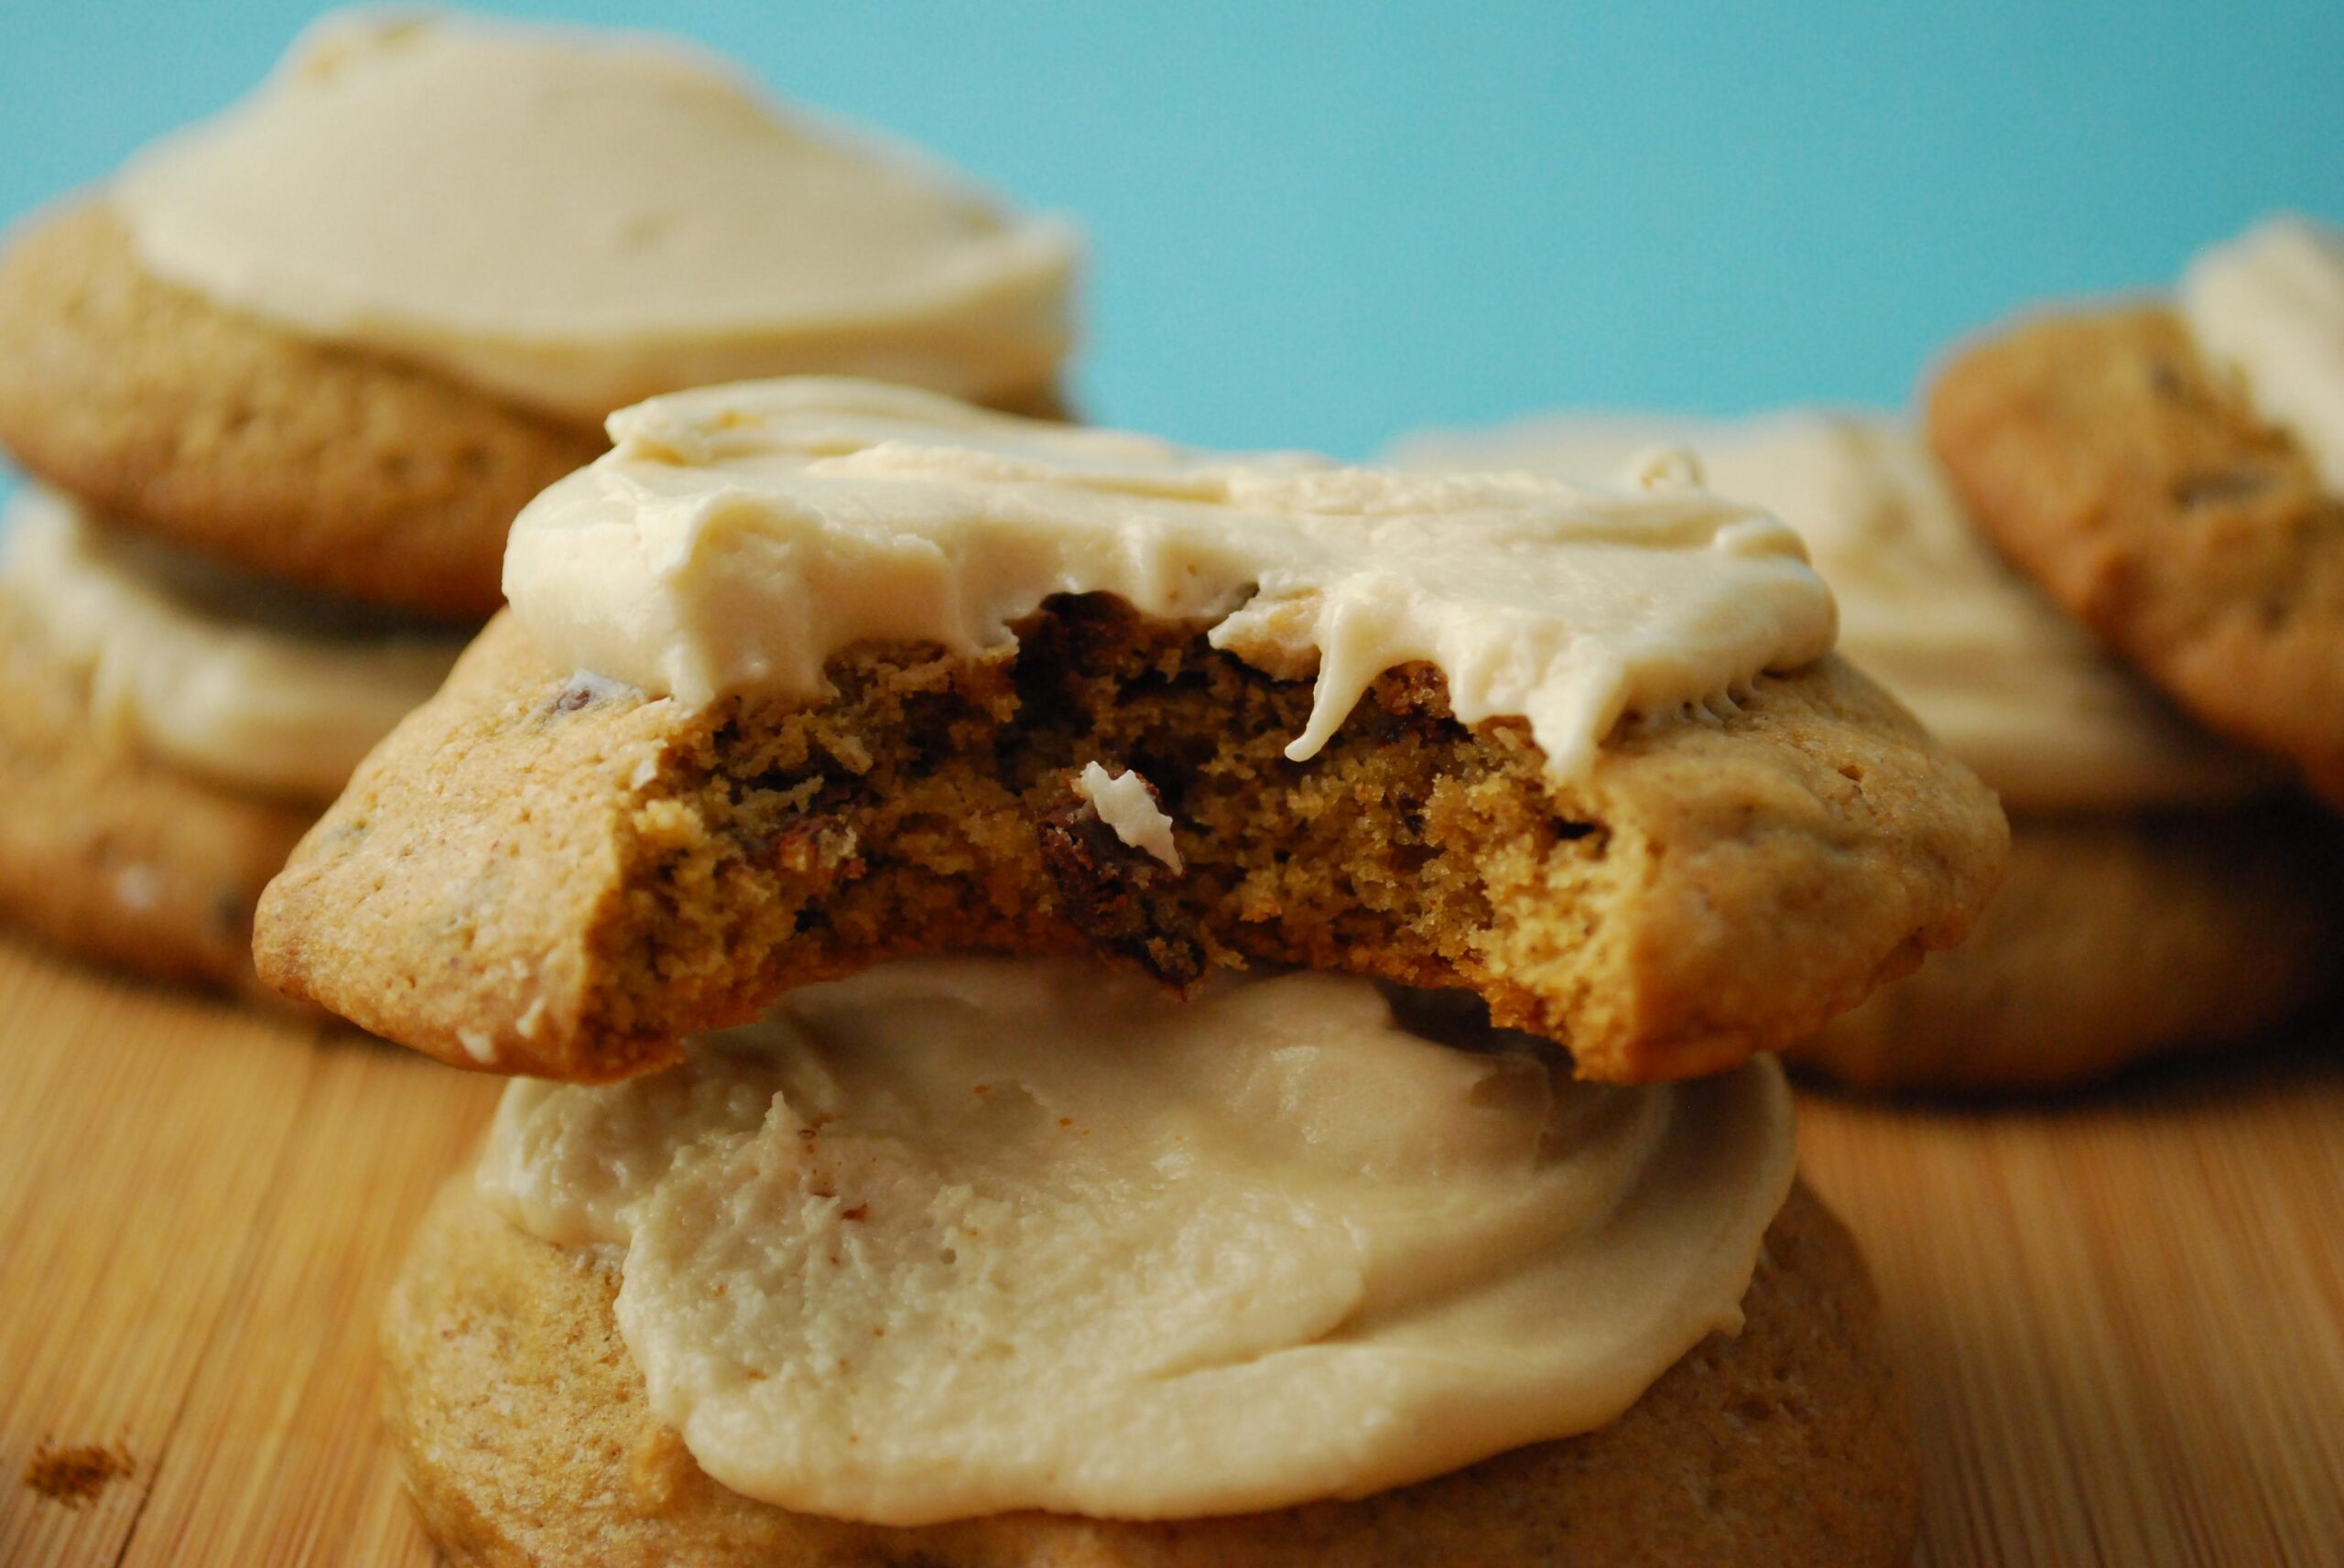  Drizzled with Kahlua icing, these cookies are sure to impress at any gathering.